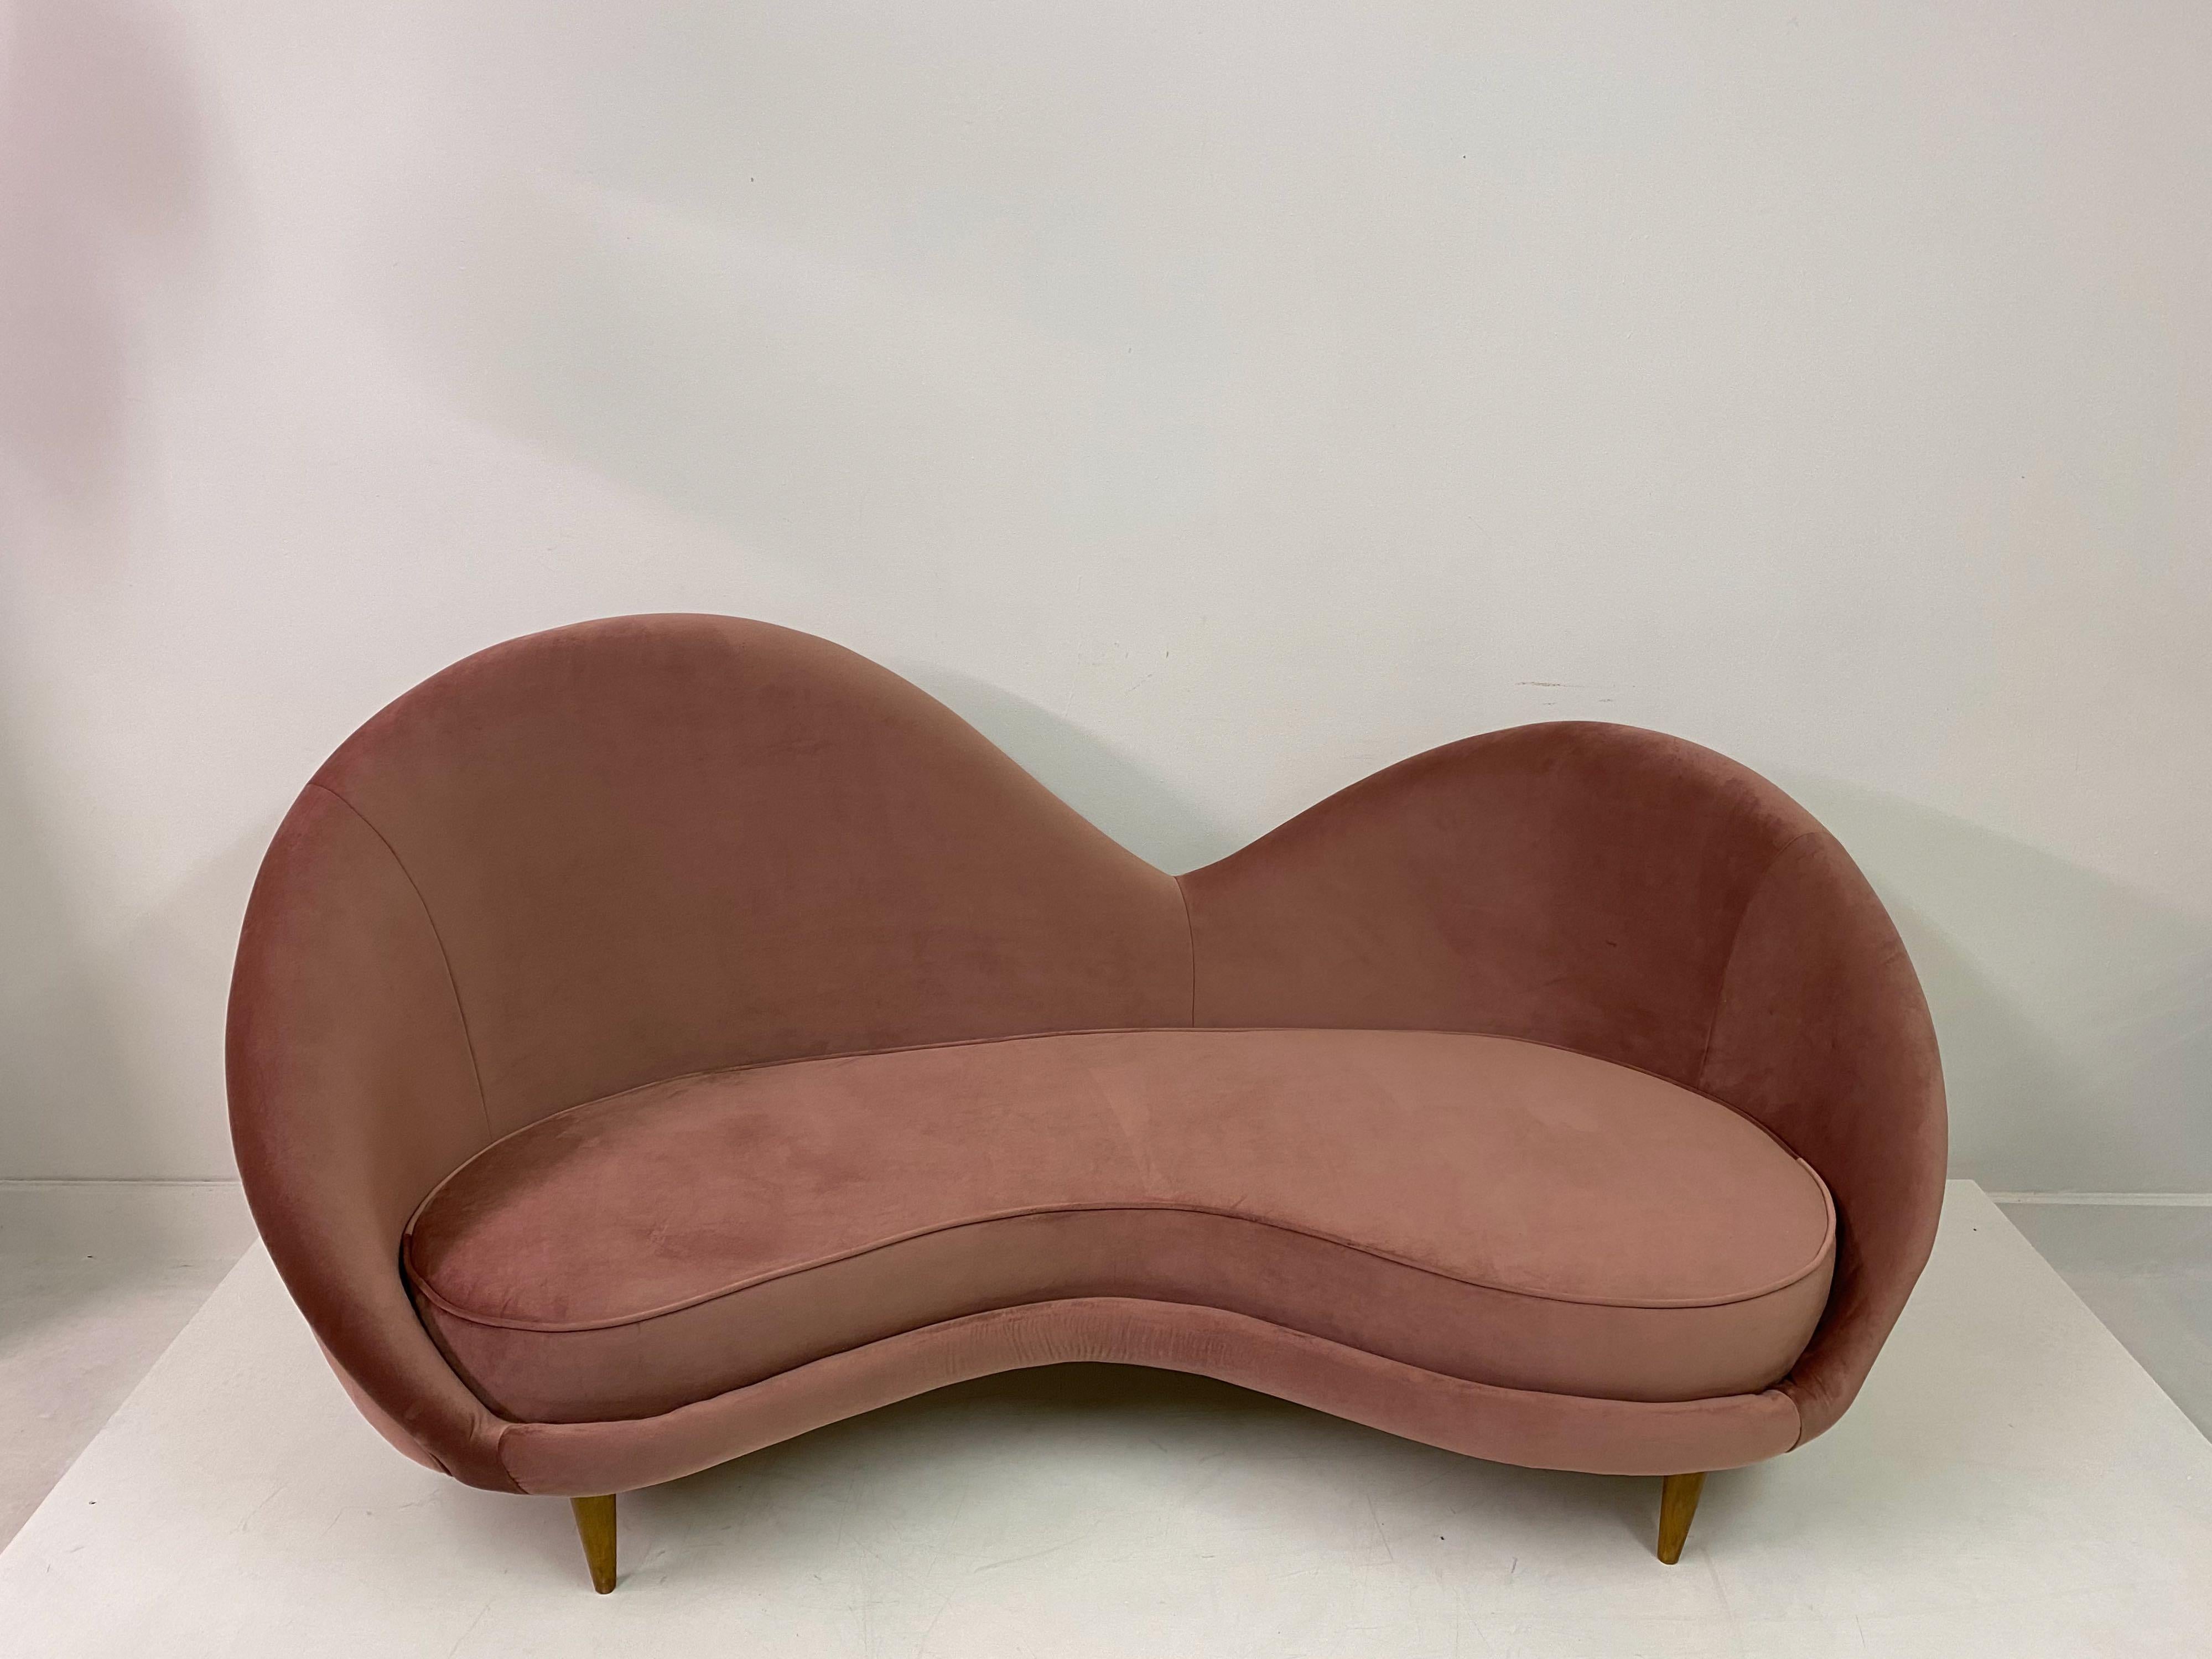 Unusual shaped sofa

1950s style

Soft tone pink velvet

Turned conical legs

Measures: Seat height 36cm

This one is in stock but others can be made to order in Italy

Can be upholstered in a fabric of your own choosing

Italy